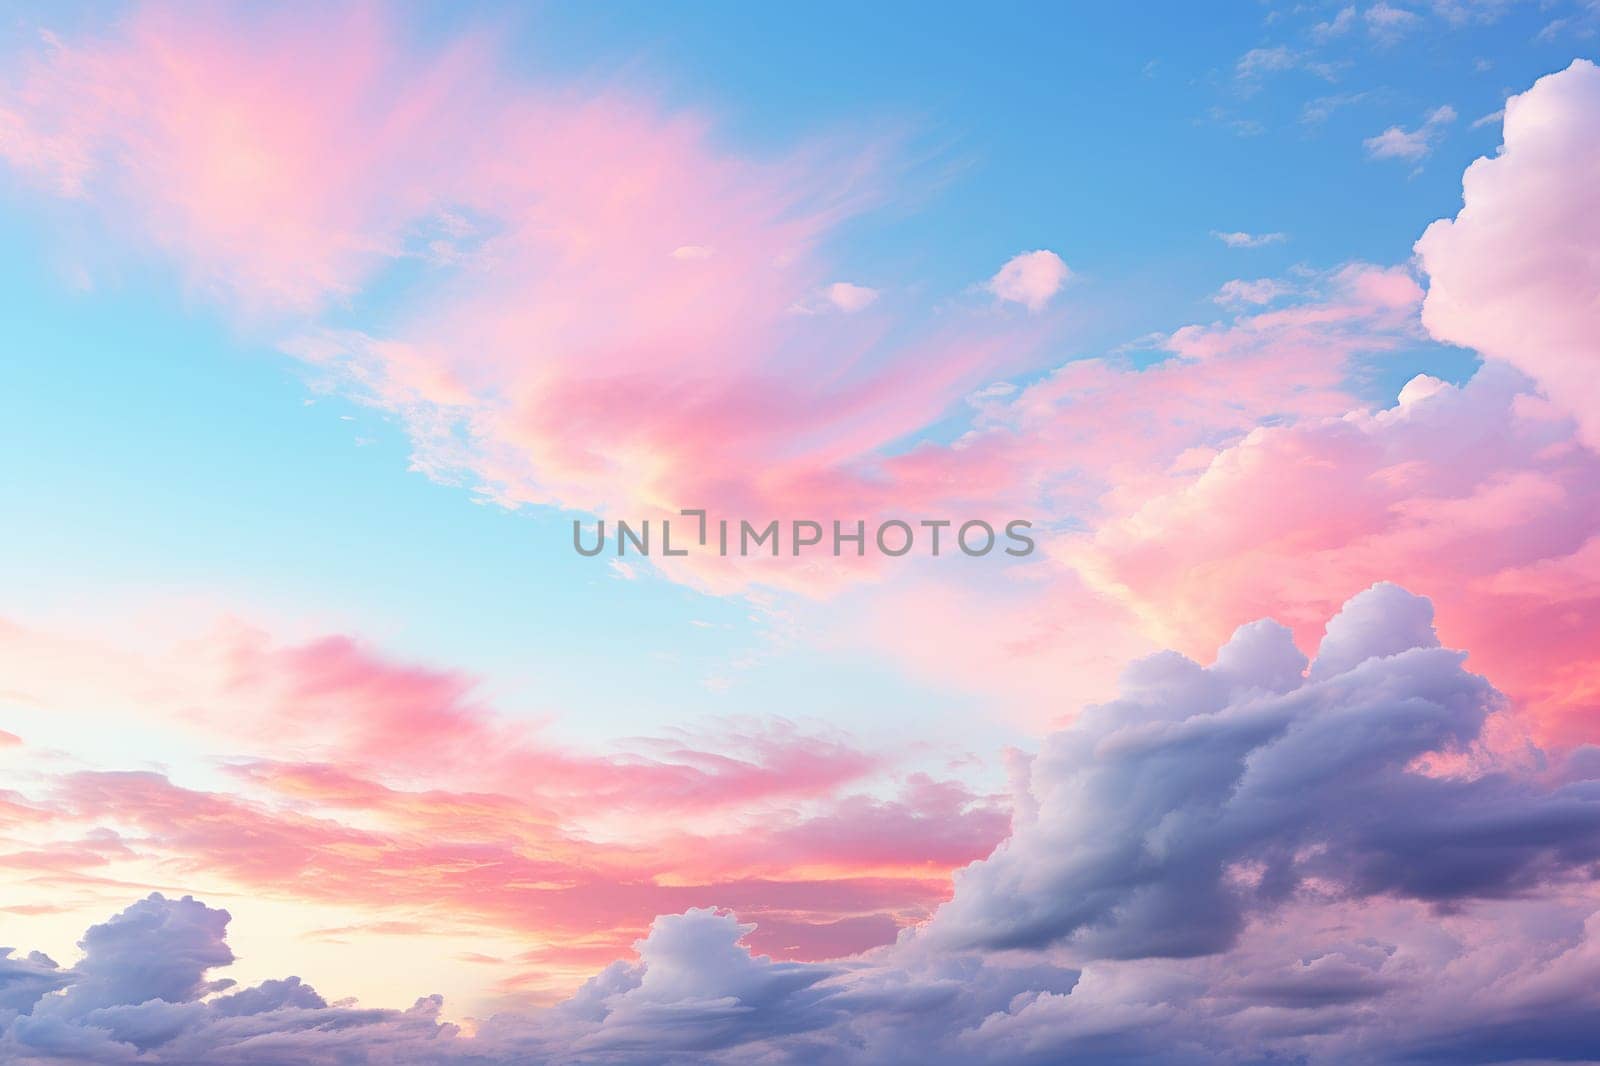 Pink clouds on the blue sky.